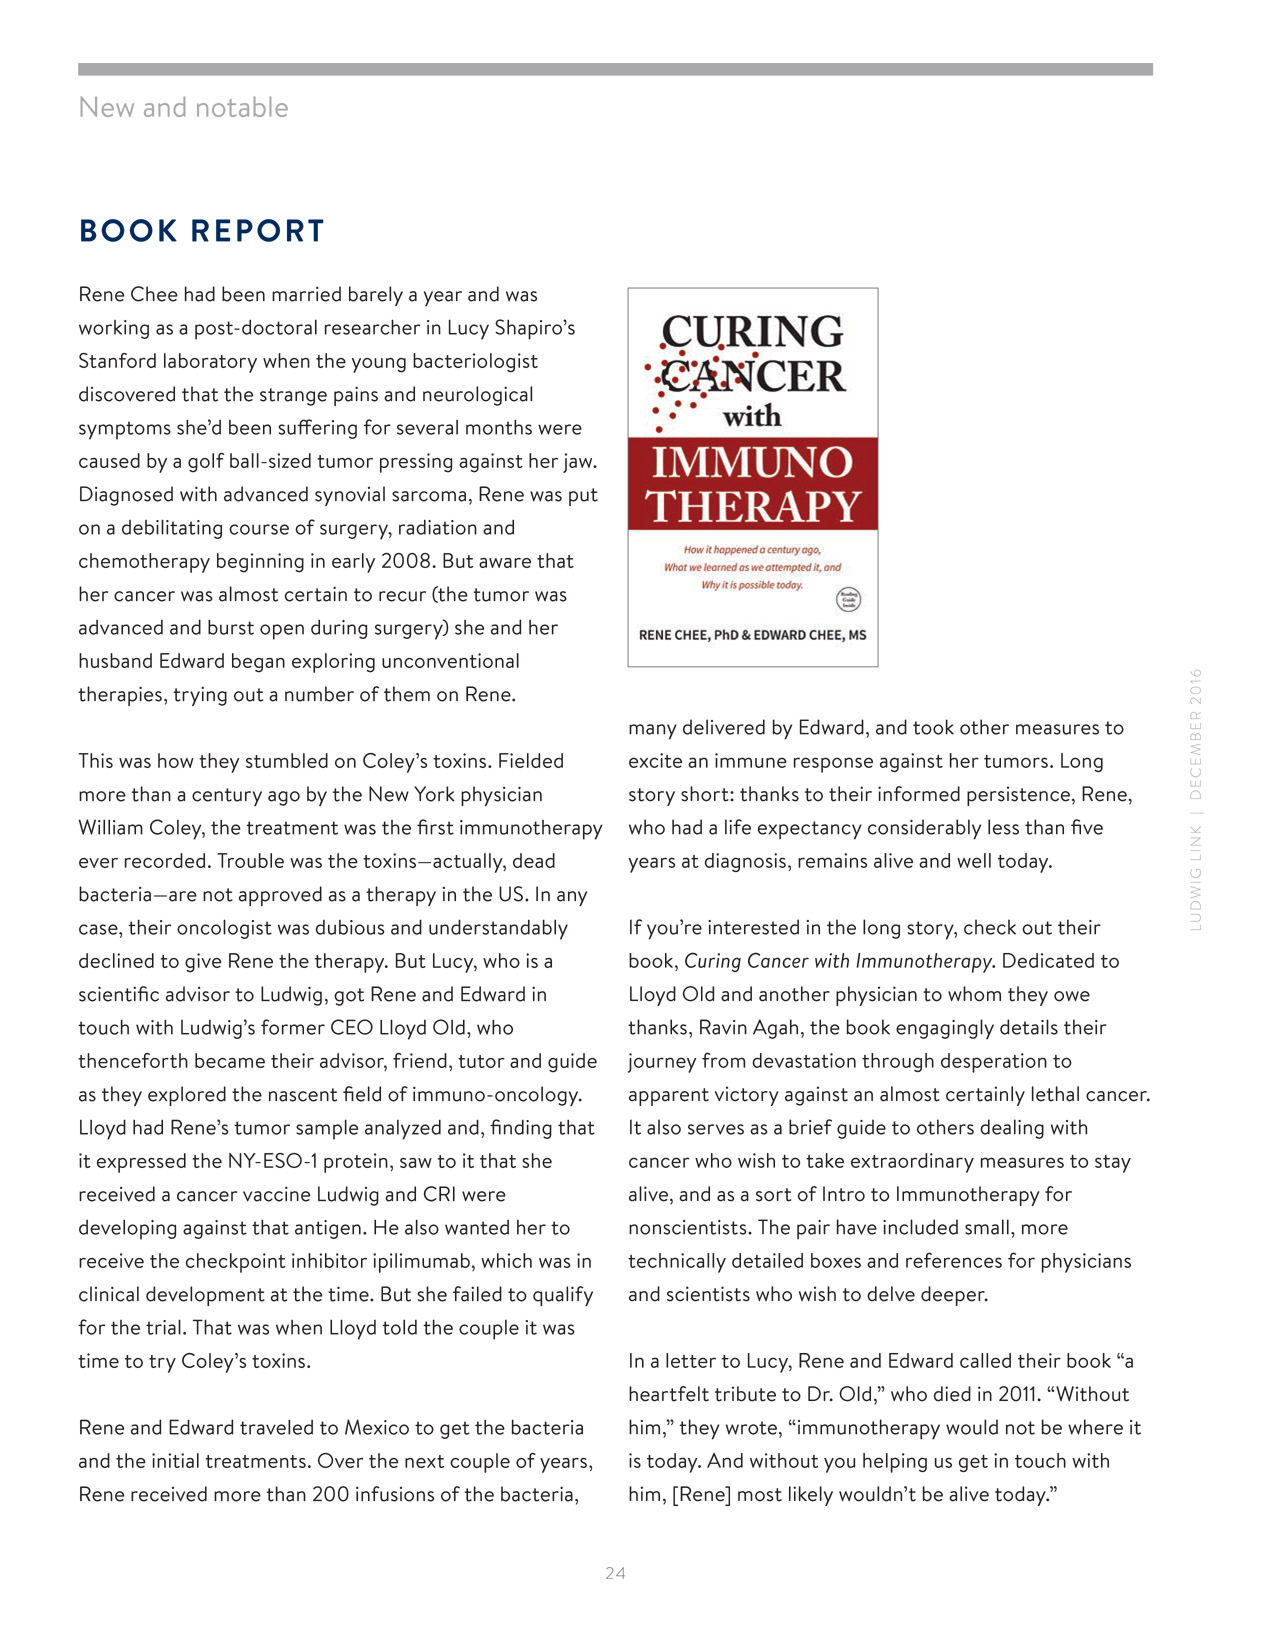 Curing cancer with immunotherapy book report Ludwig Link Newsletter